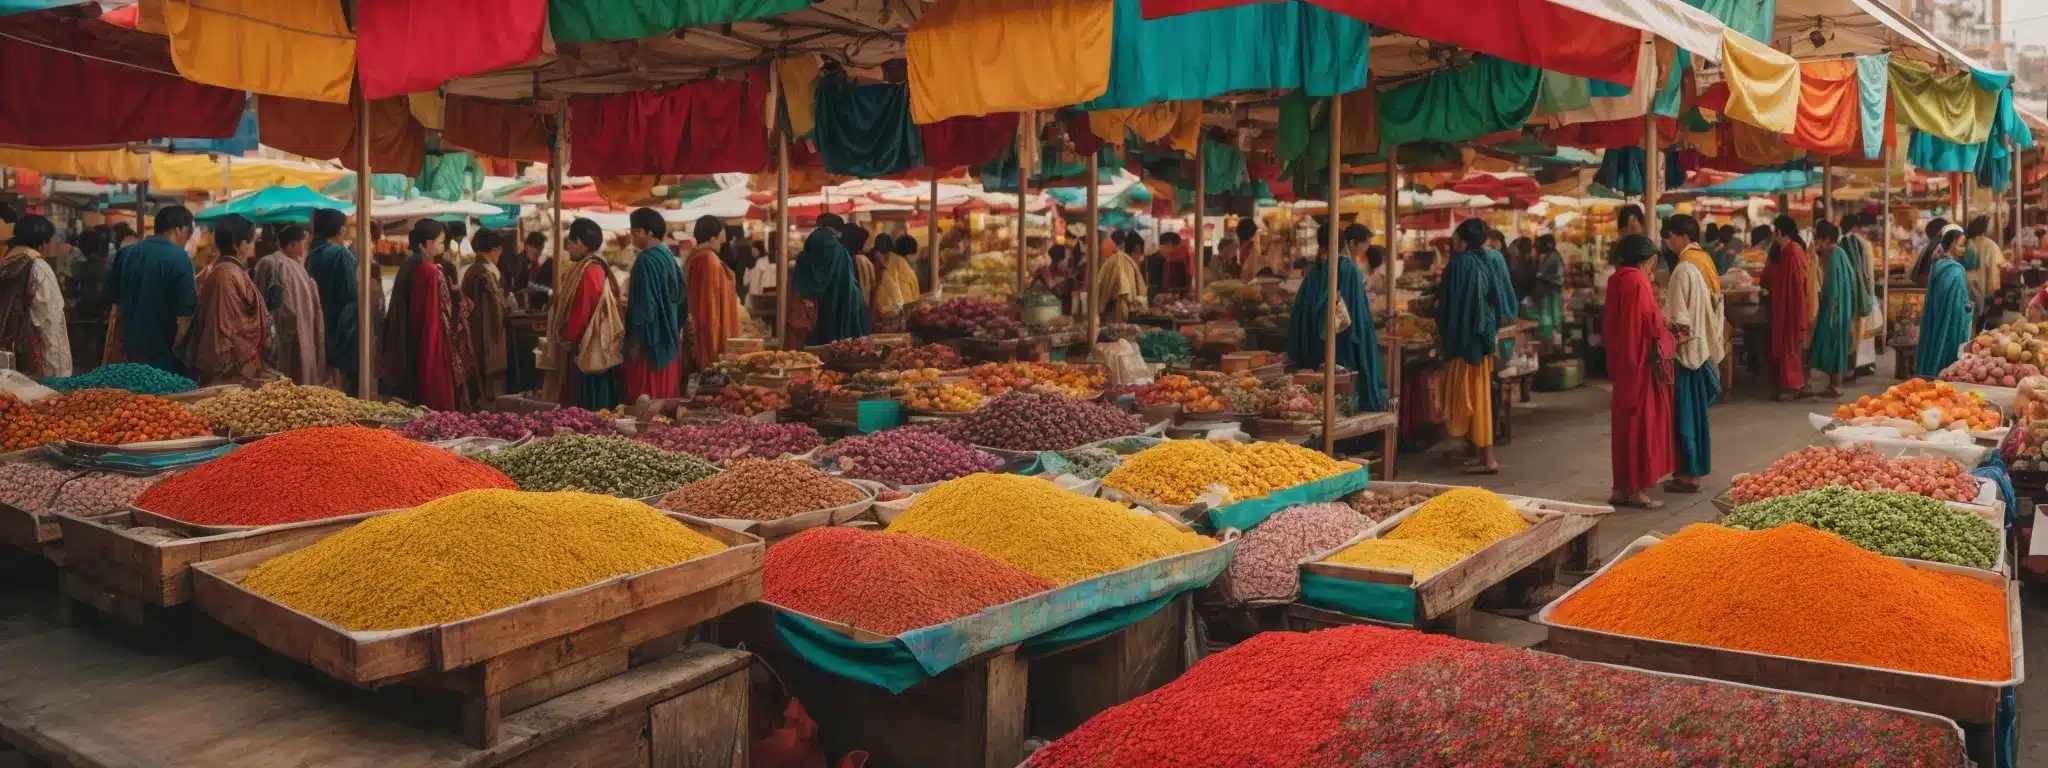 A Kaleidoscope Of Vibrant Market Stalls, Each With Its Unique Flair, Stands Out In A Sea Of Color And Creativity.